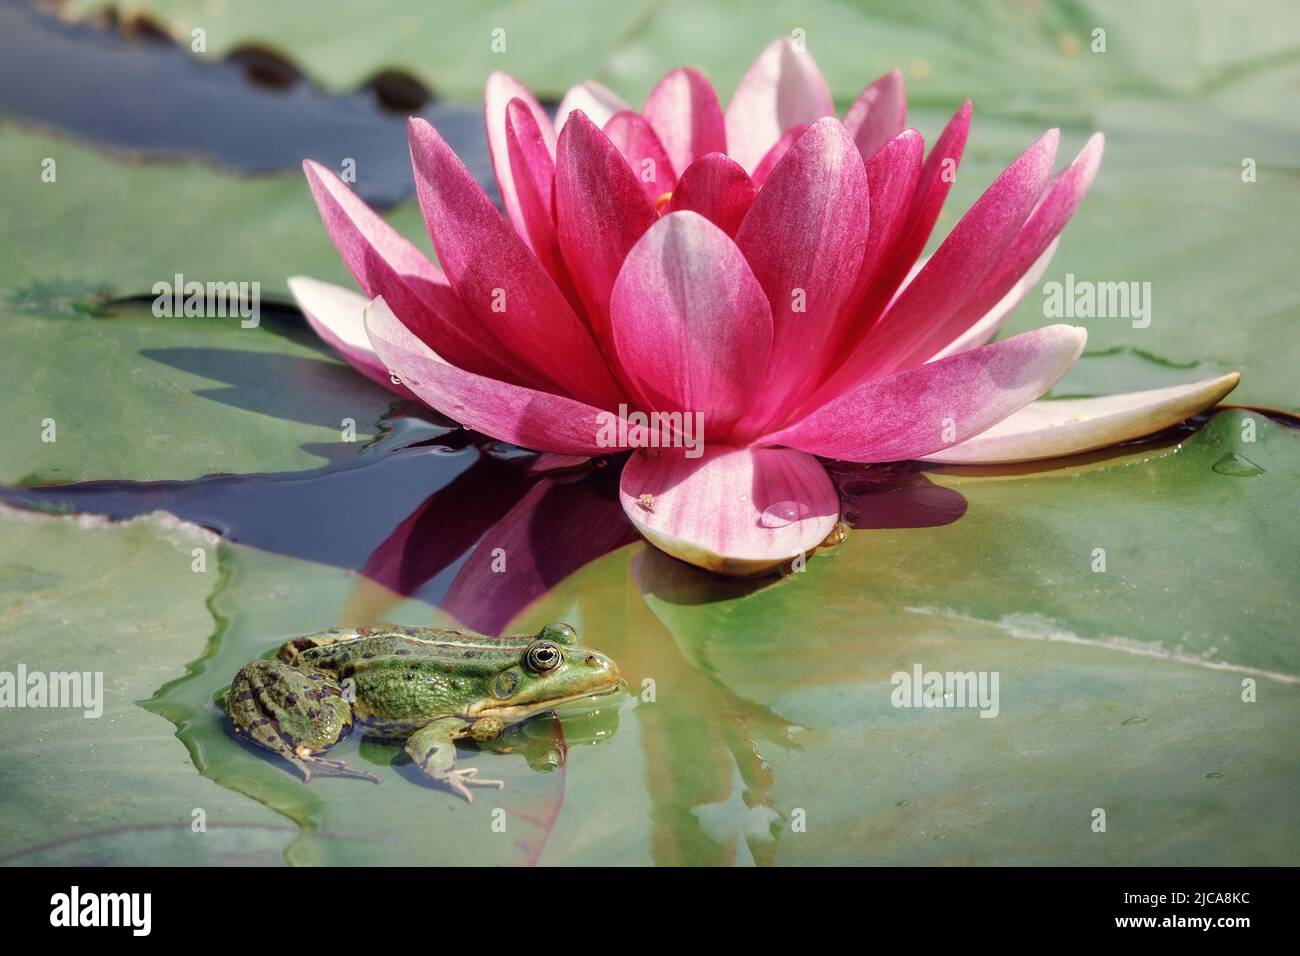 The blossom pink lotus in a day time, a green frog sits on the leaf in water. Free copy space for text Stock Photo